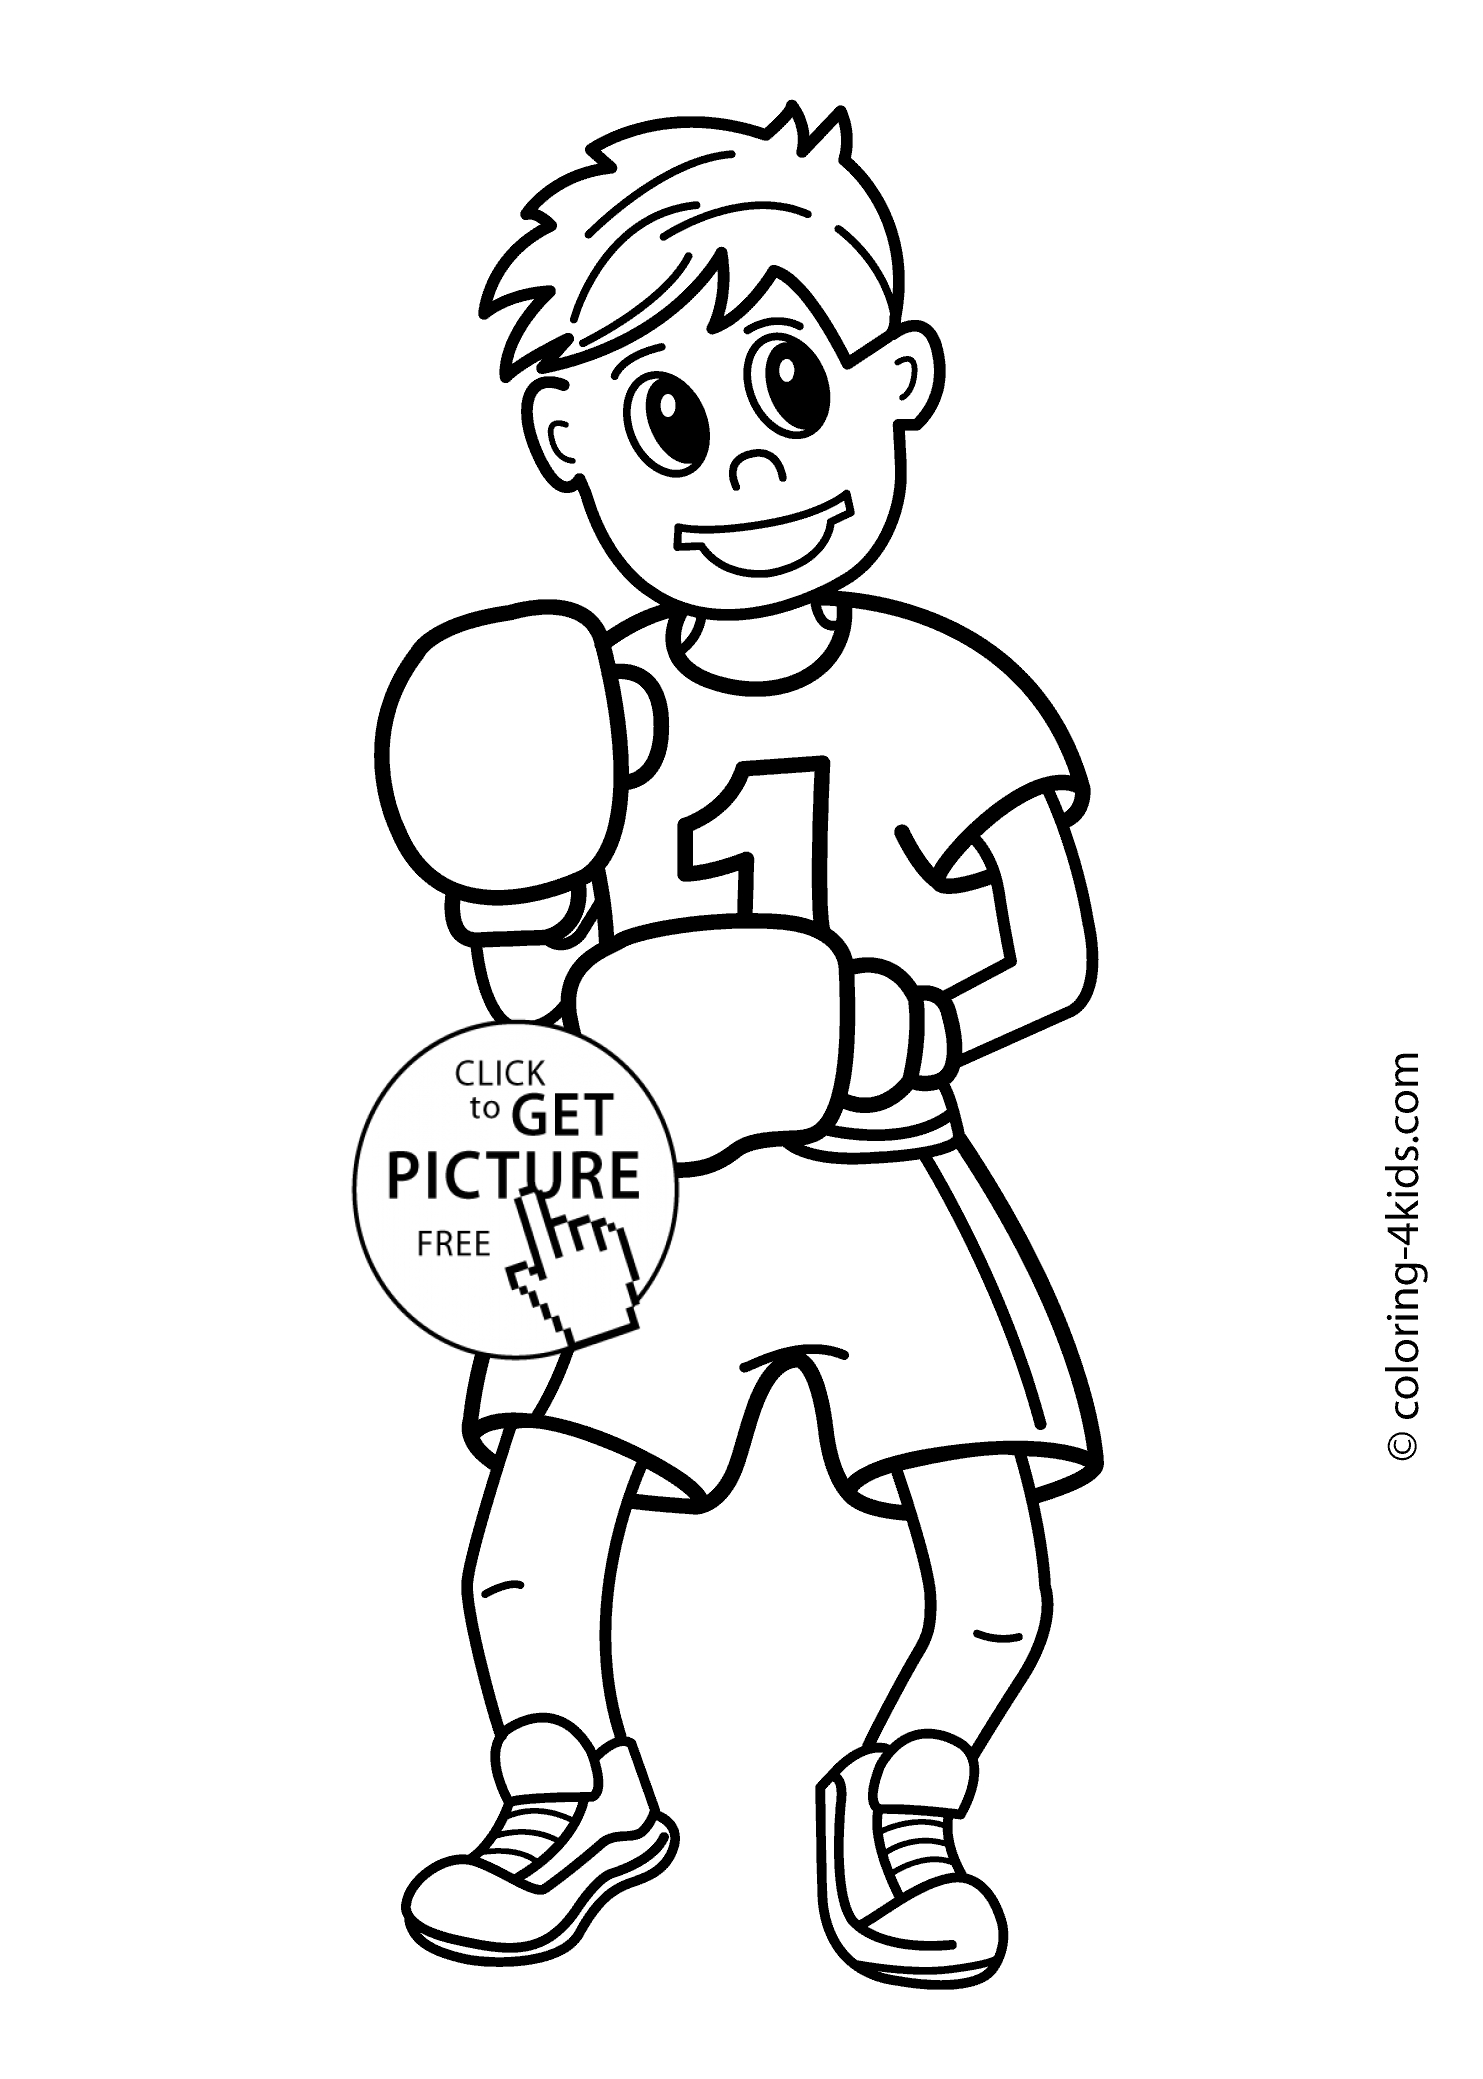 Sports Coloring Book Pages Coloring Ideas Sport Boks Boxing Coloring Page For Kids Printable